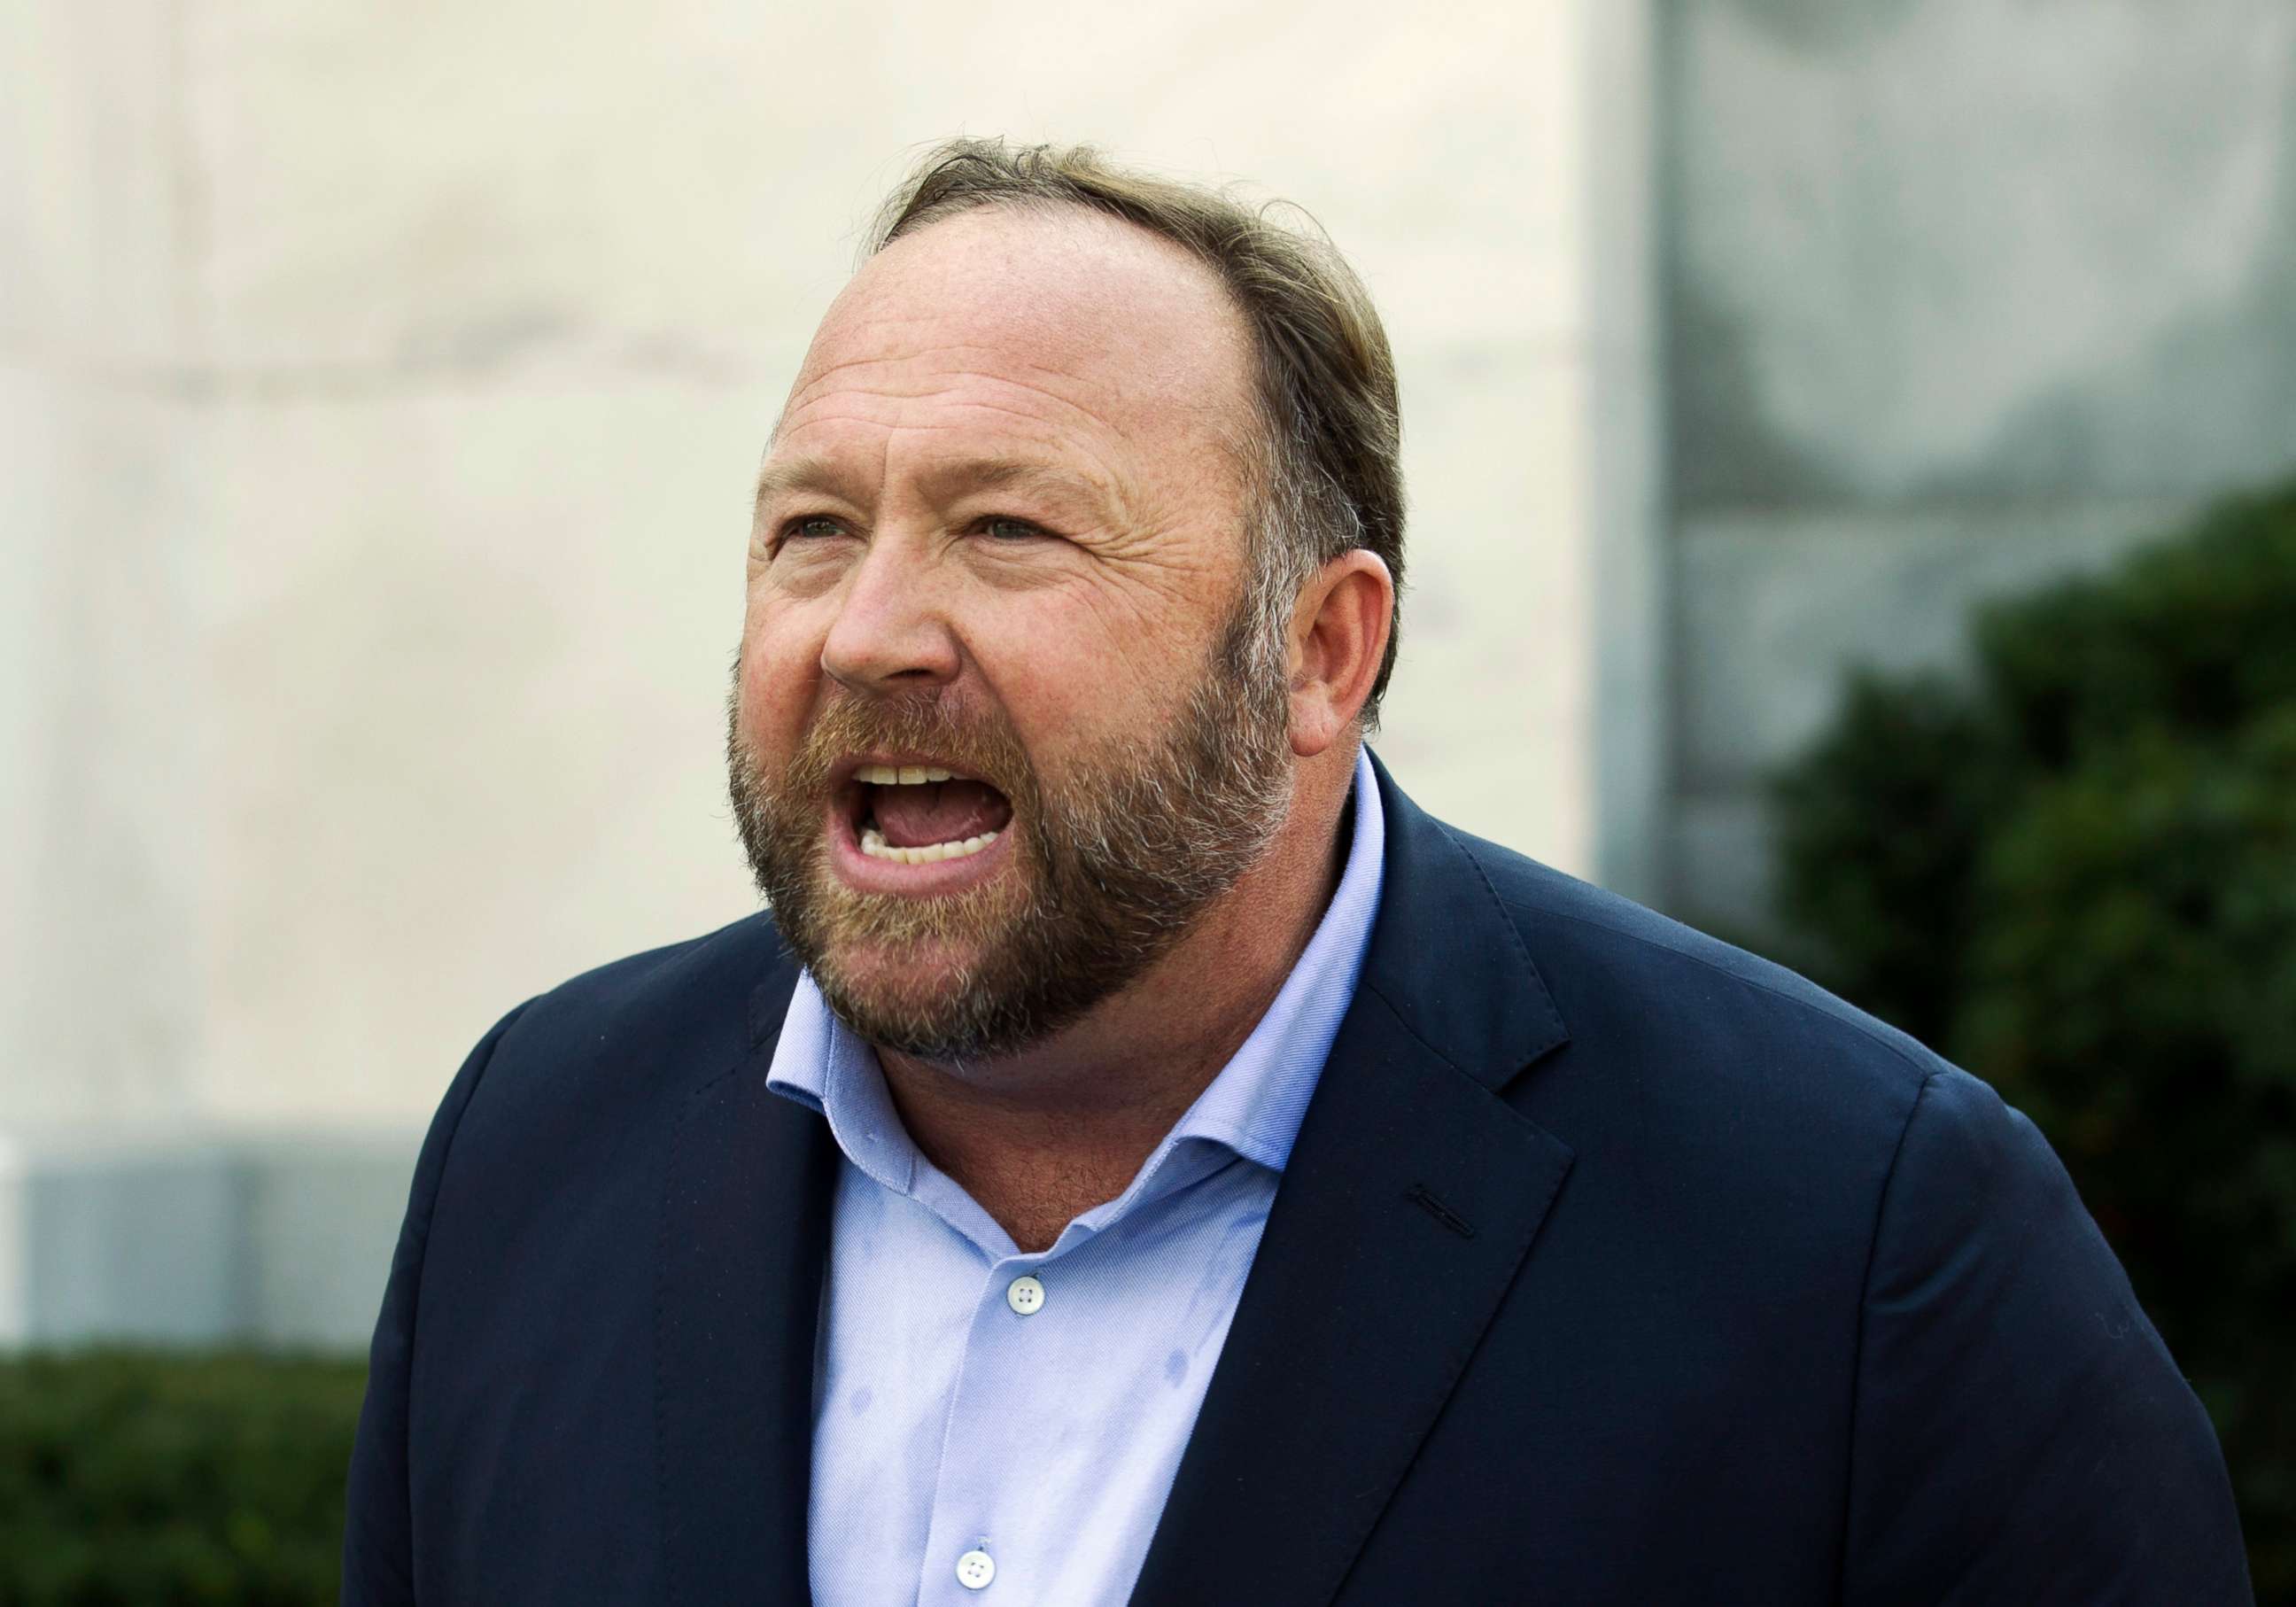 PHOTO: In this Sept. 5, 2018 file photo Alex Jones speaks outside of the Dirksen building on Capitol Hill in Washington, D.C.